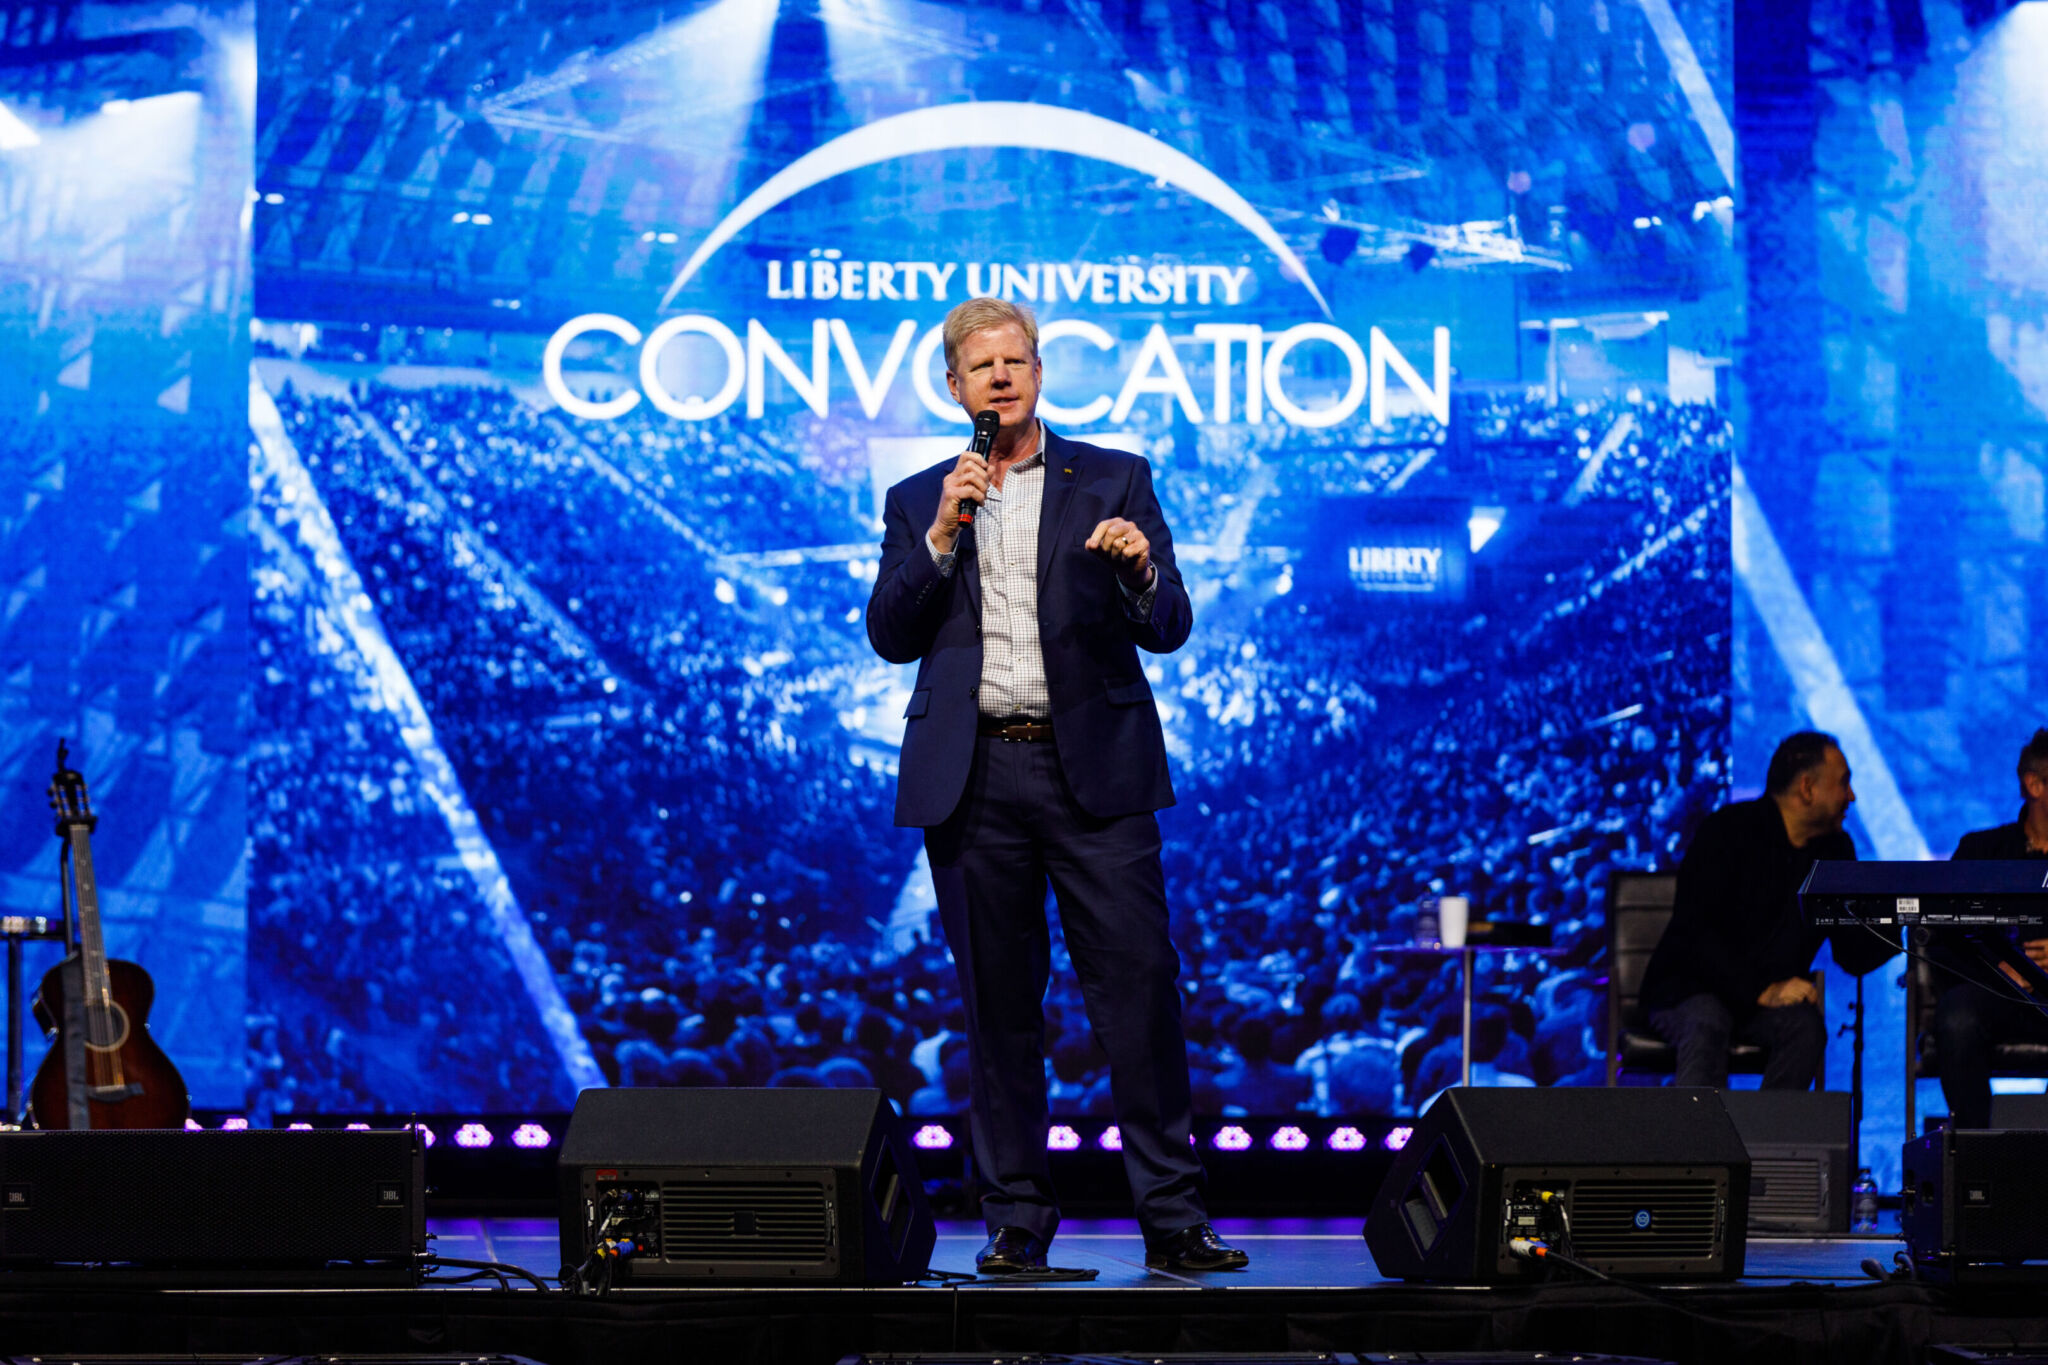 College For A Weekend (CFAW) Liberty University